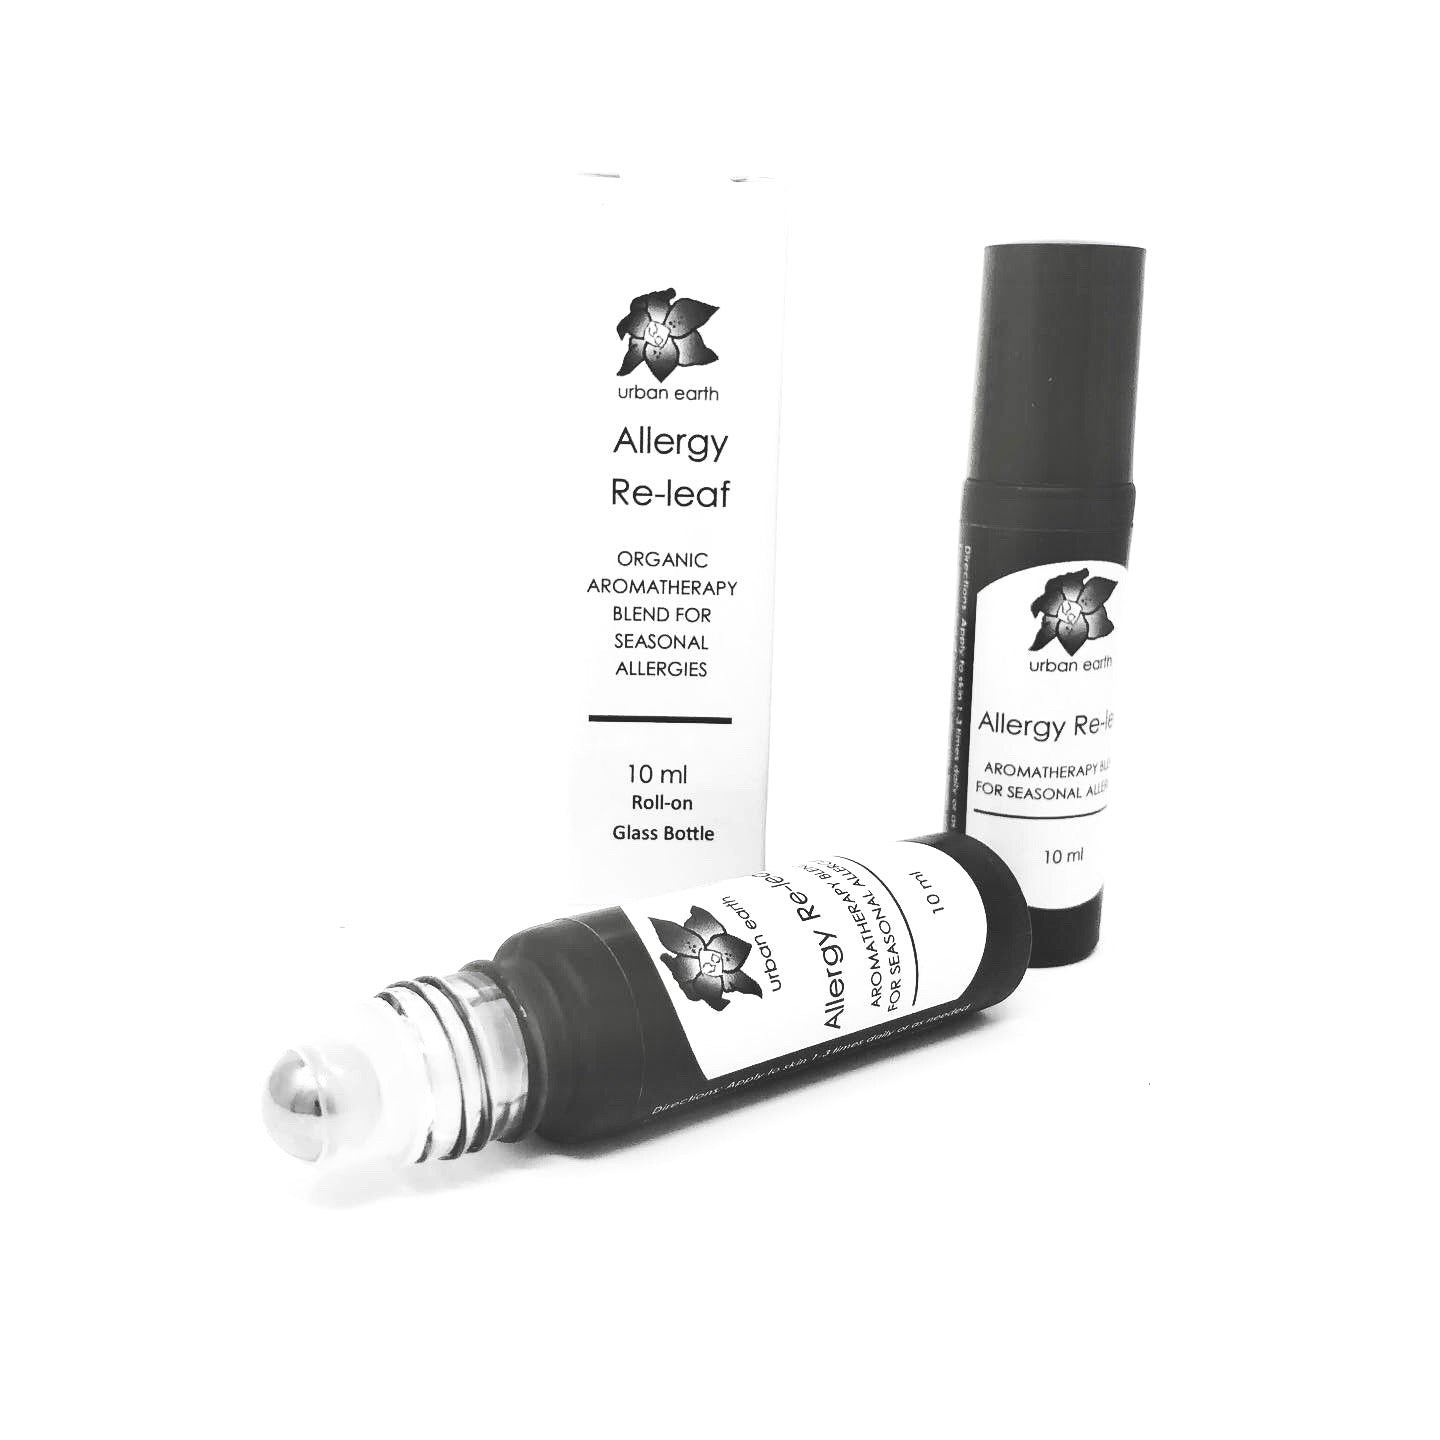 Allergy Re-leaf (Aromatherapy Roll-on)